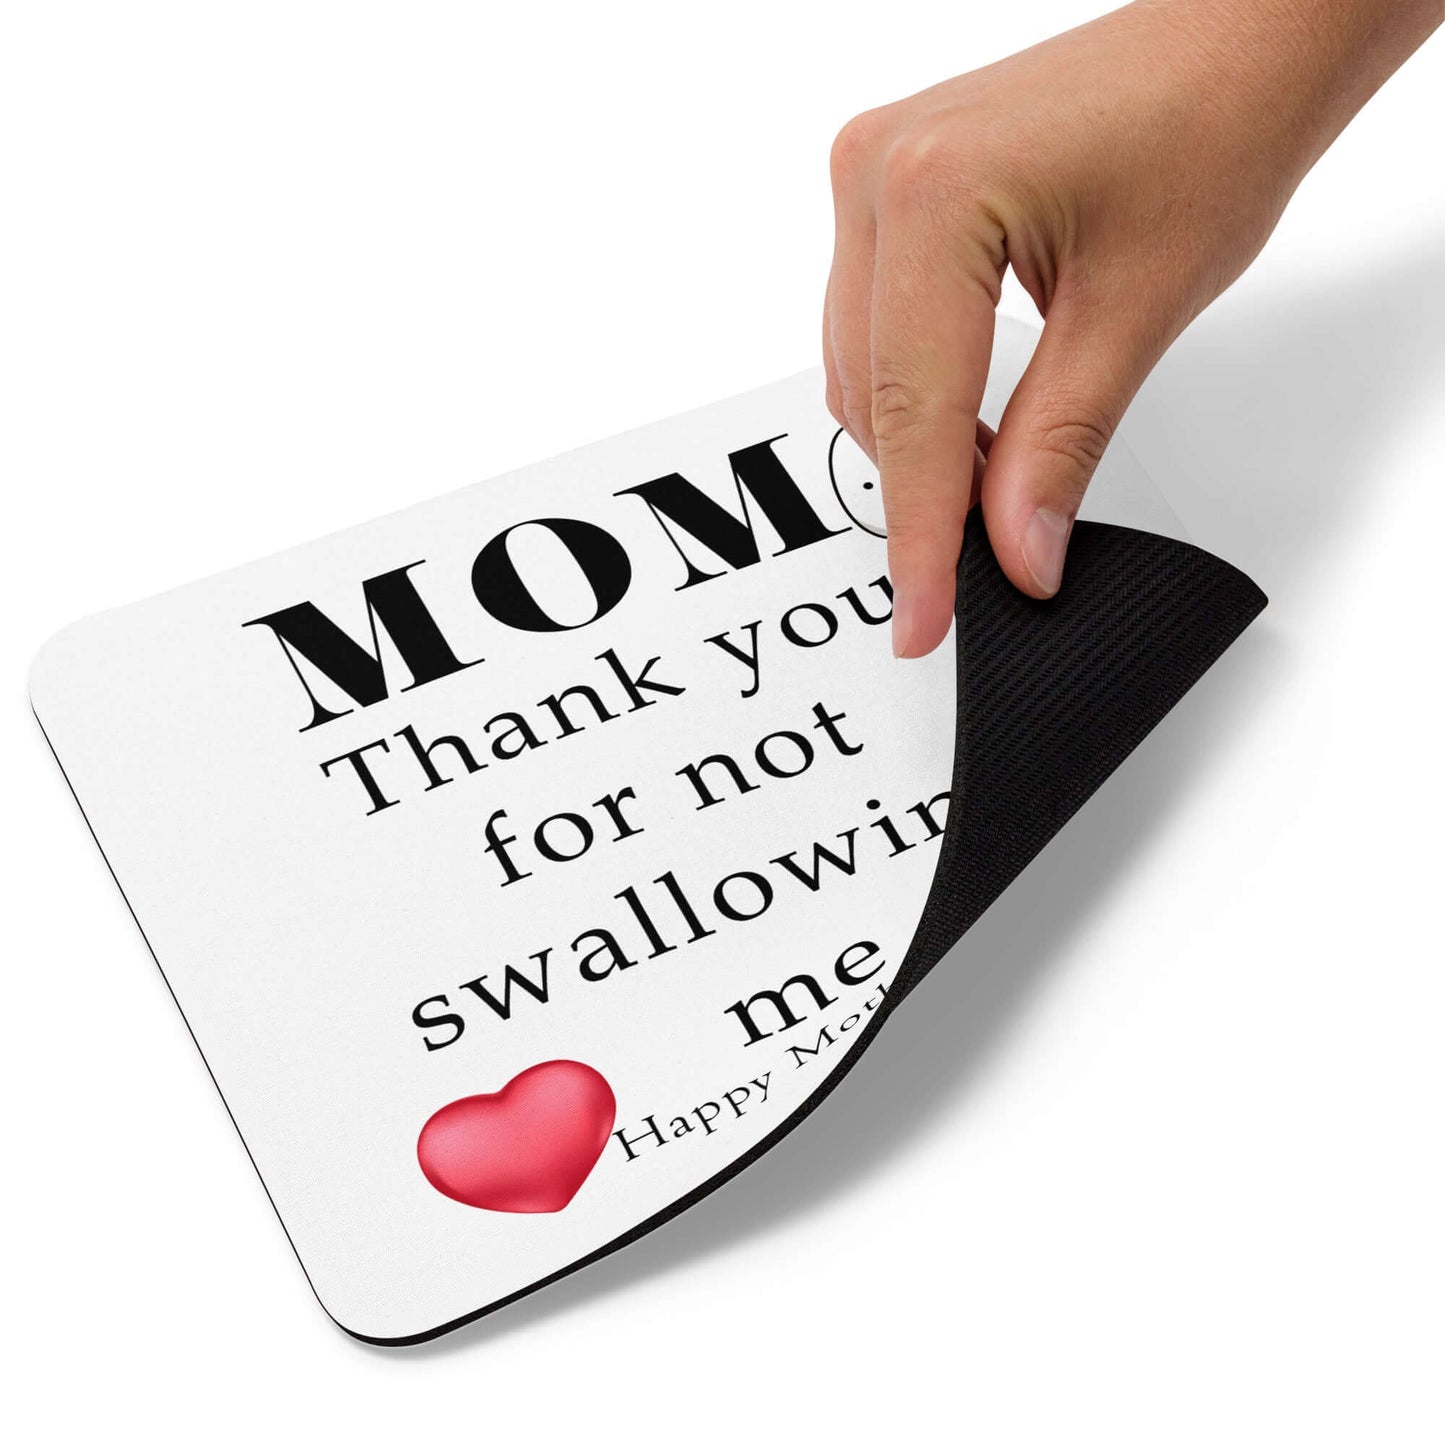 Mom, thank you for not swallowing me - Mouse pad